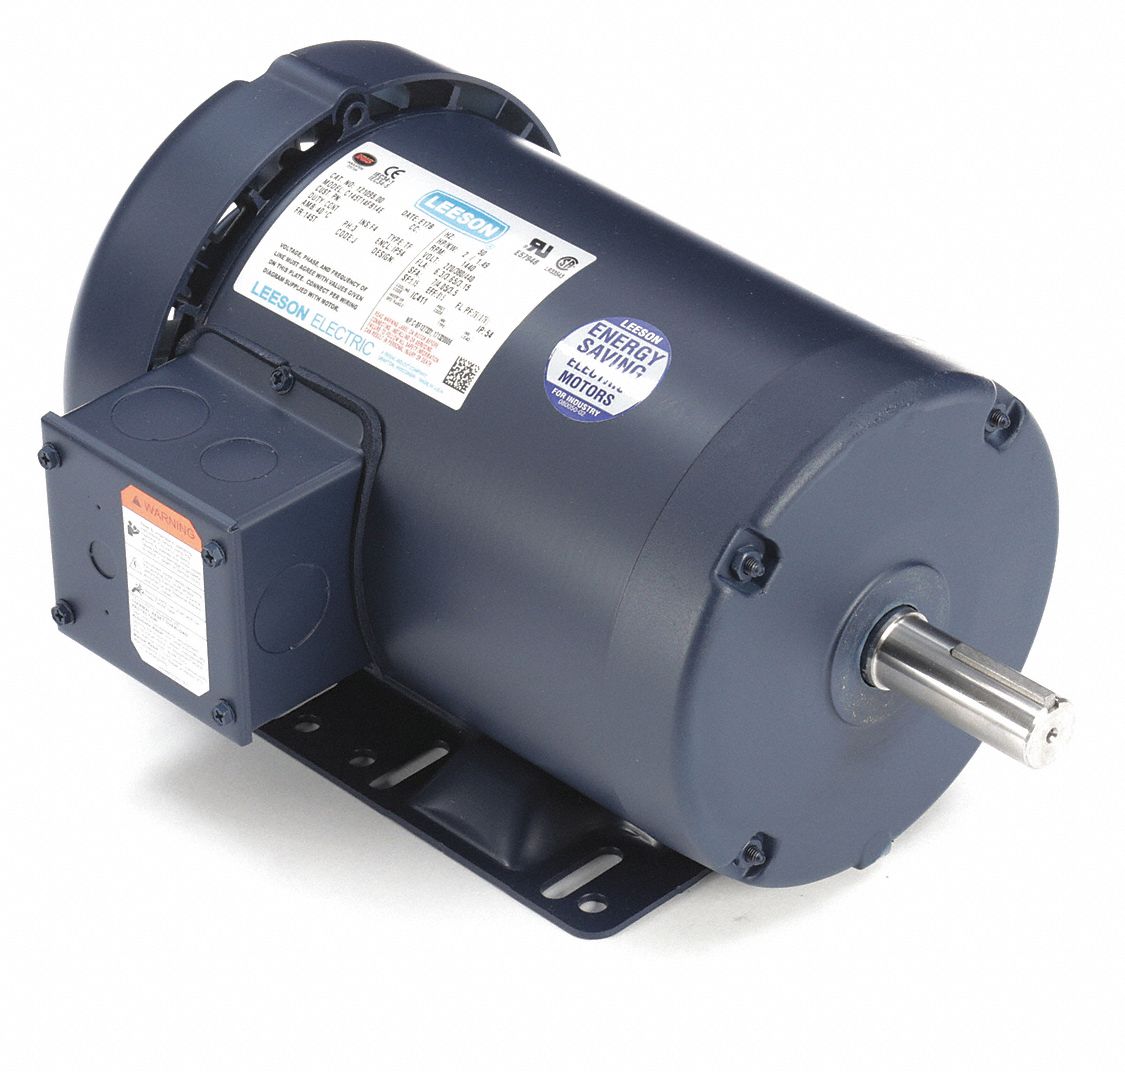 LEESON 50 Hz Motor: Totally Enclosed Fan-Cooled, HP, 2,850 Nameplate RPM, 220/380/440V AC - 4GUU3|121094.00 -